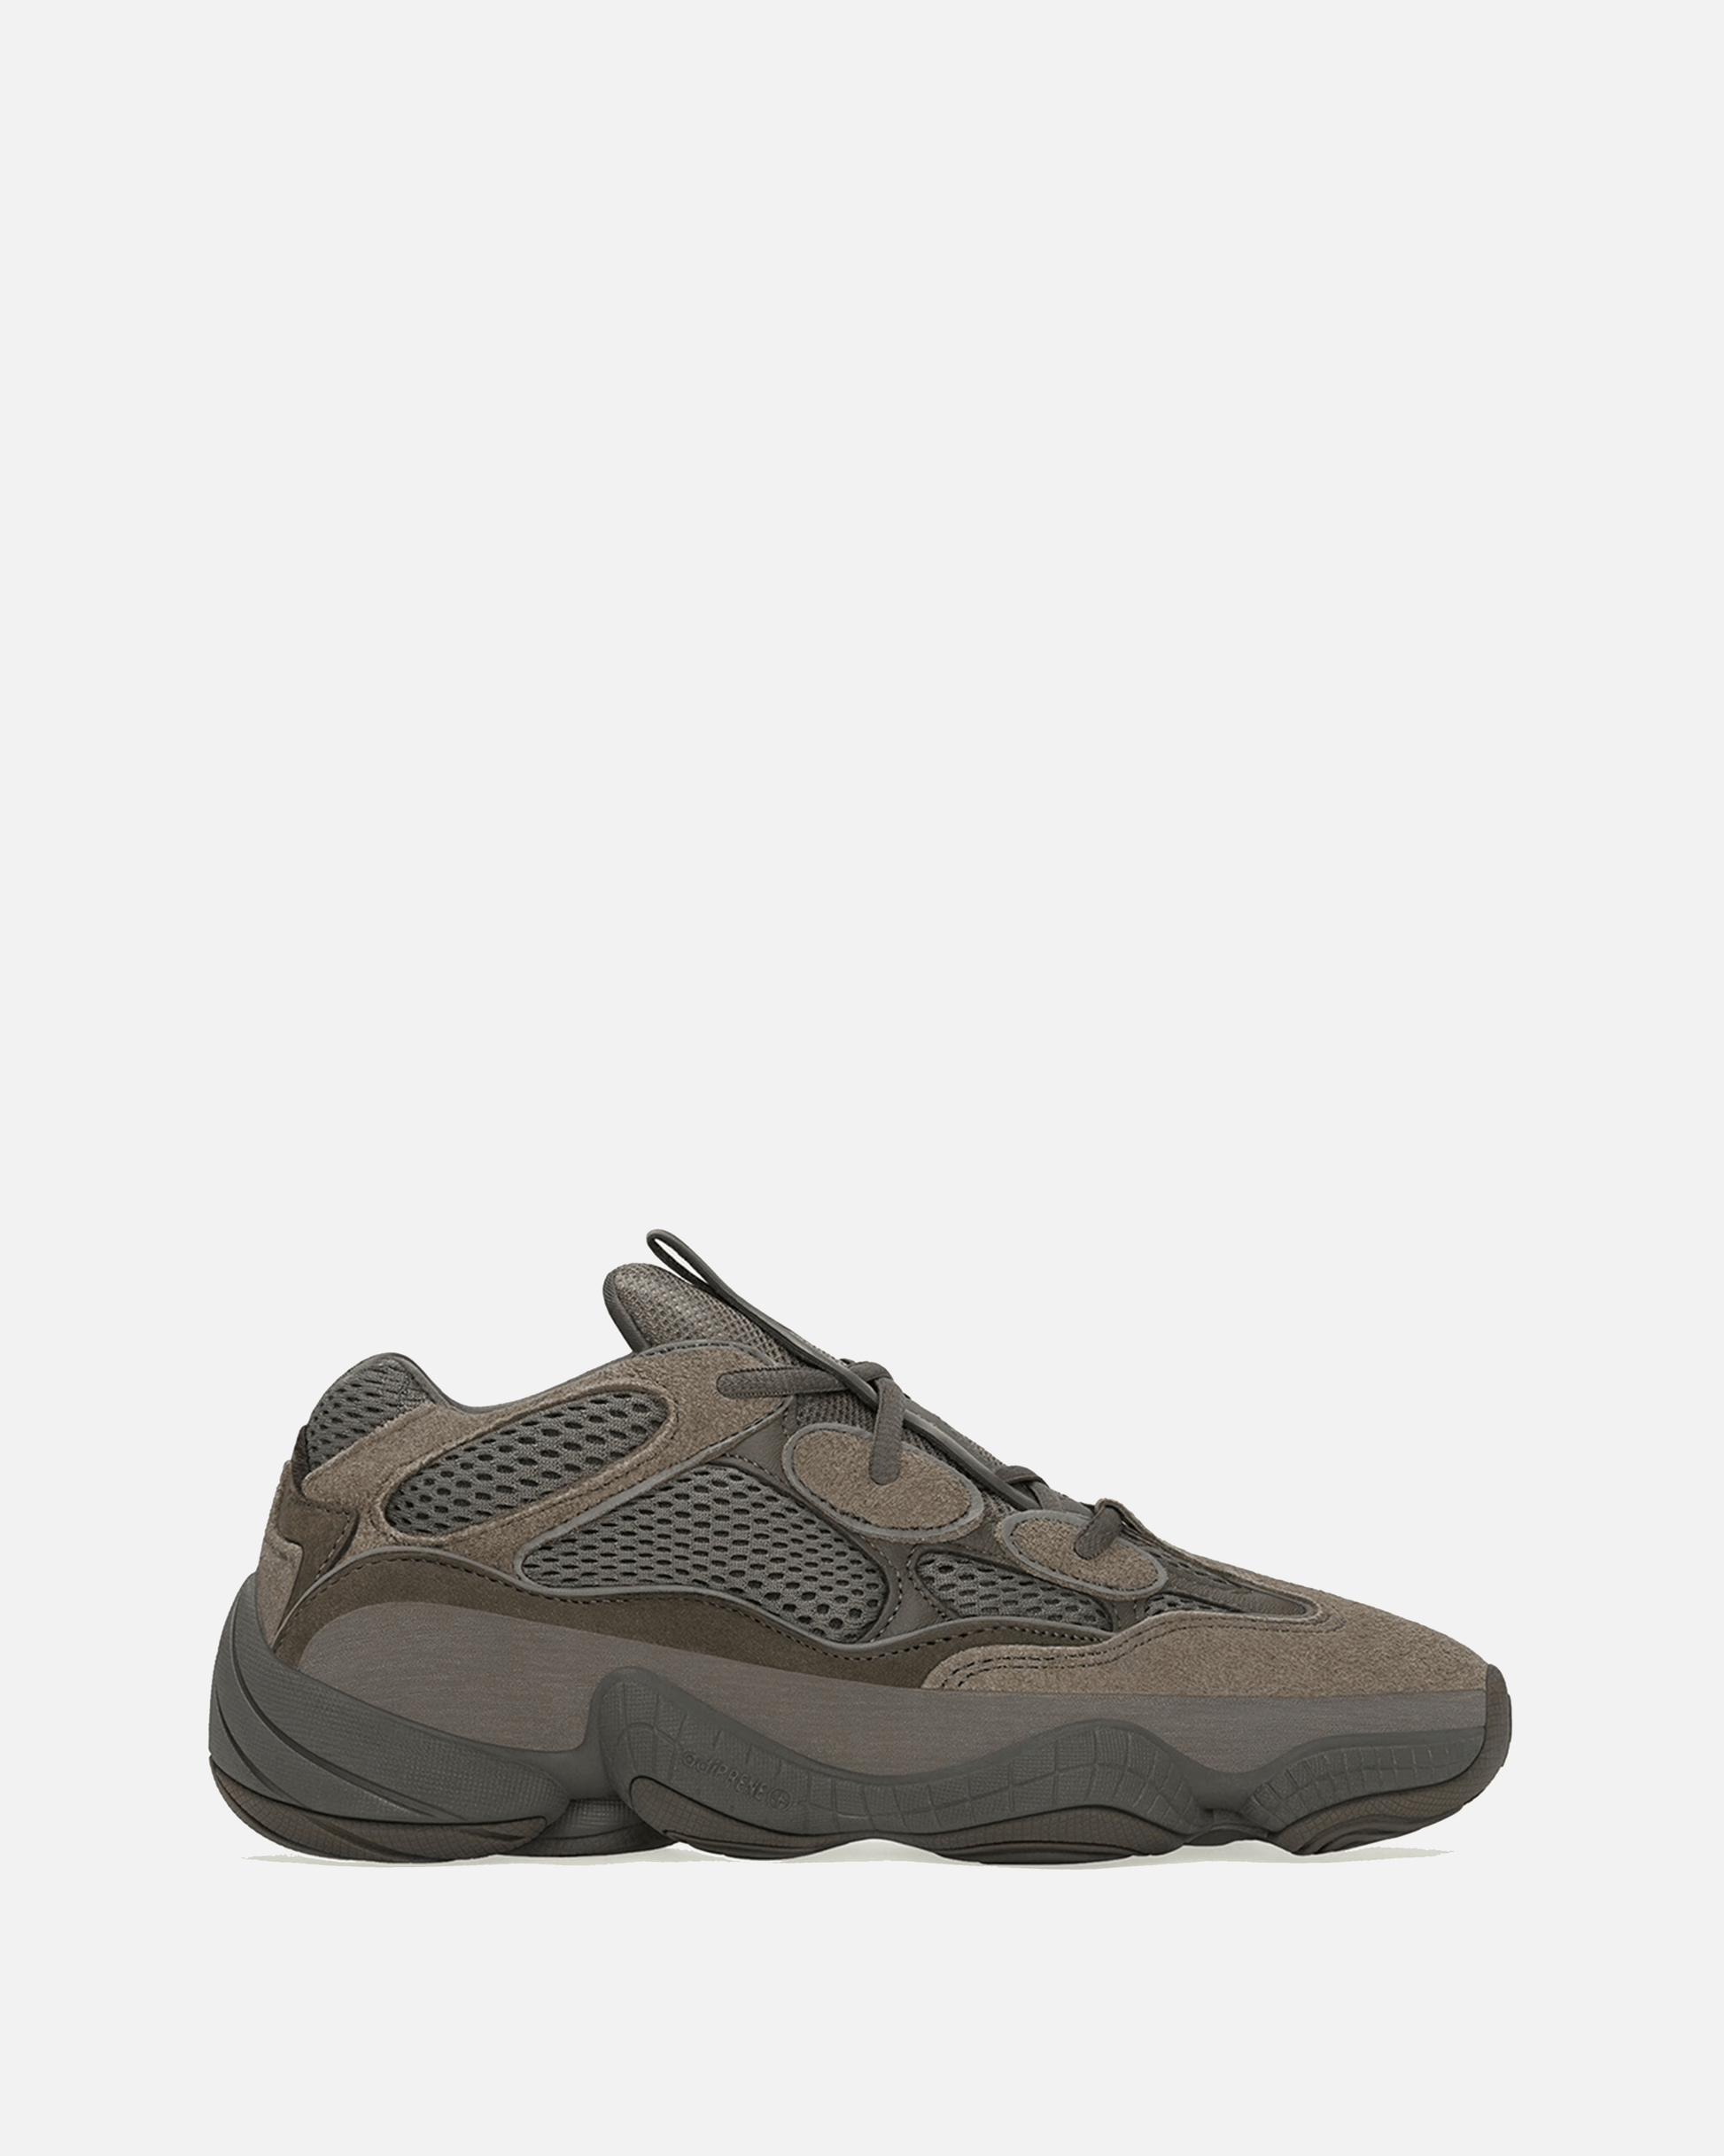 Adidas Releases Yeezy 500 'Clay Brown'